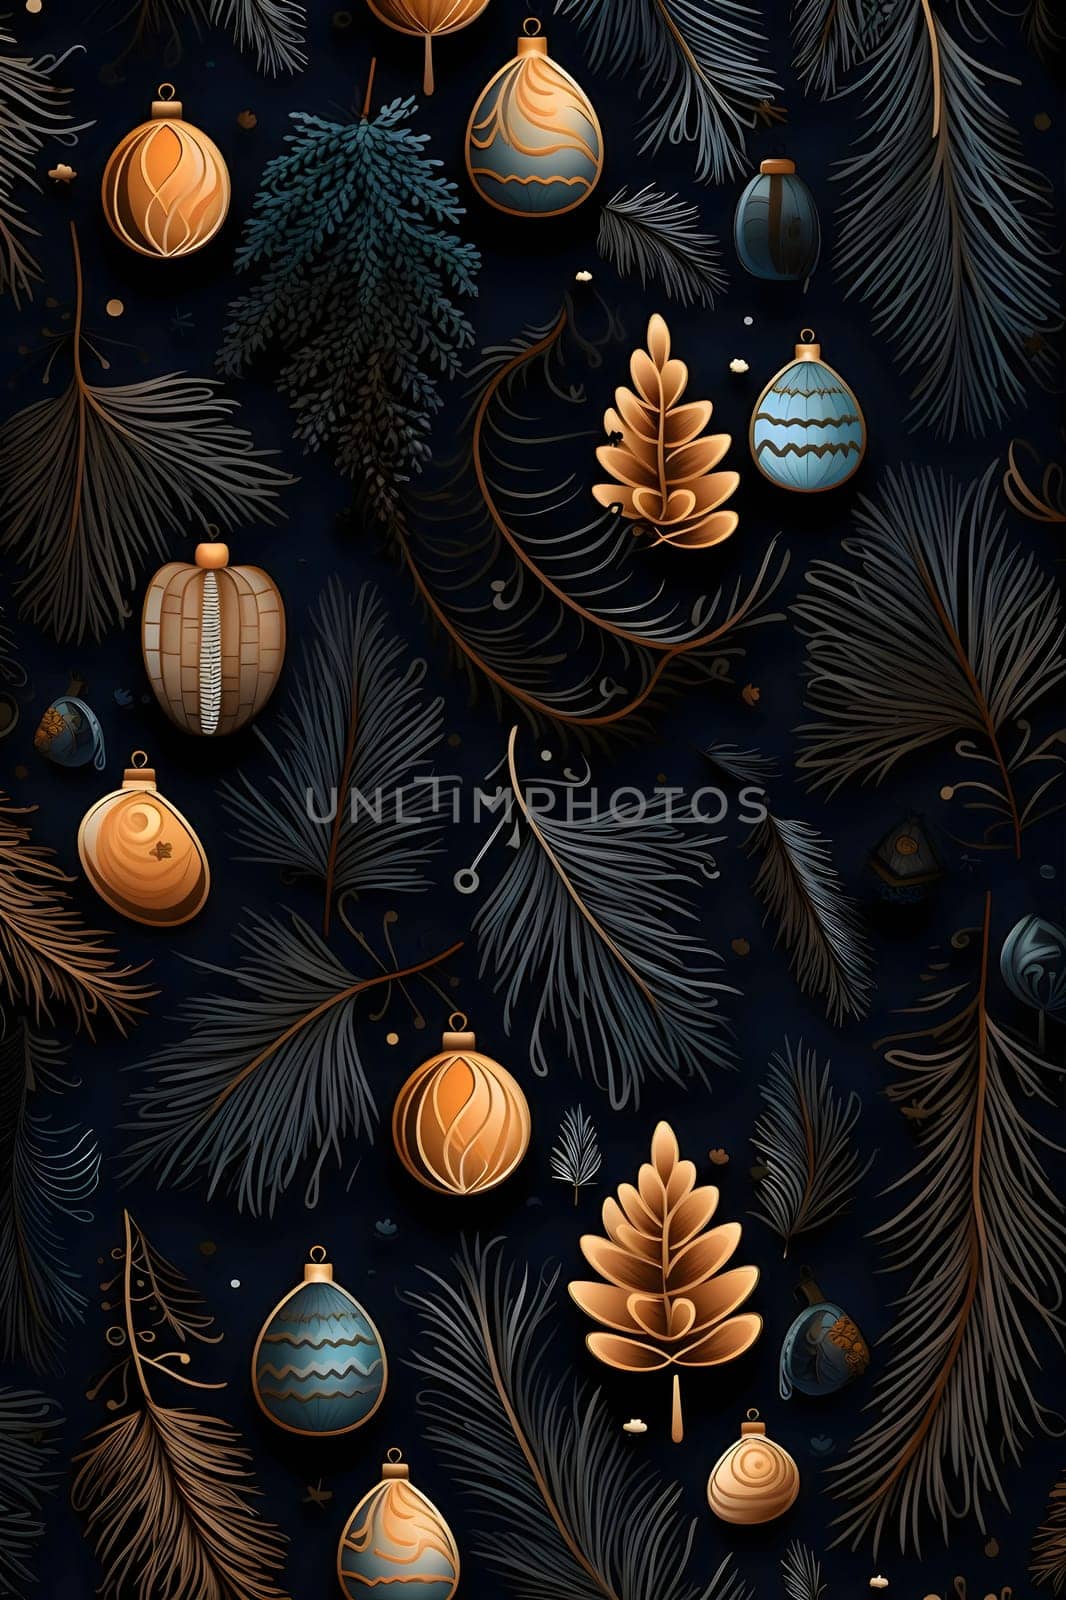 Elegant and modern. Baubles and spruce branches as abstract background, wallpaper, banner, texture design with pattern - vector. Dark colors.